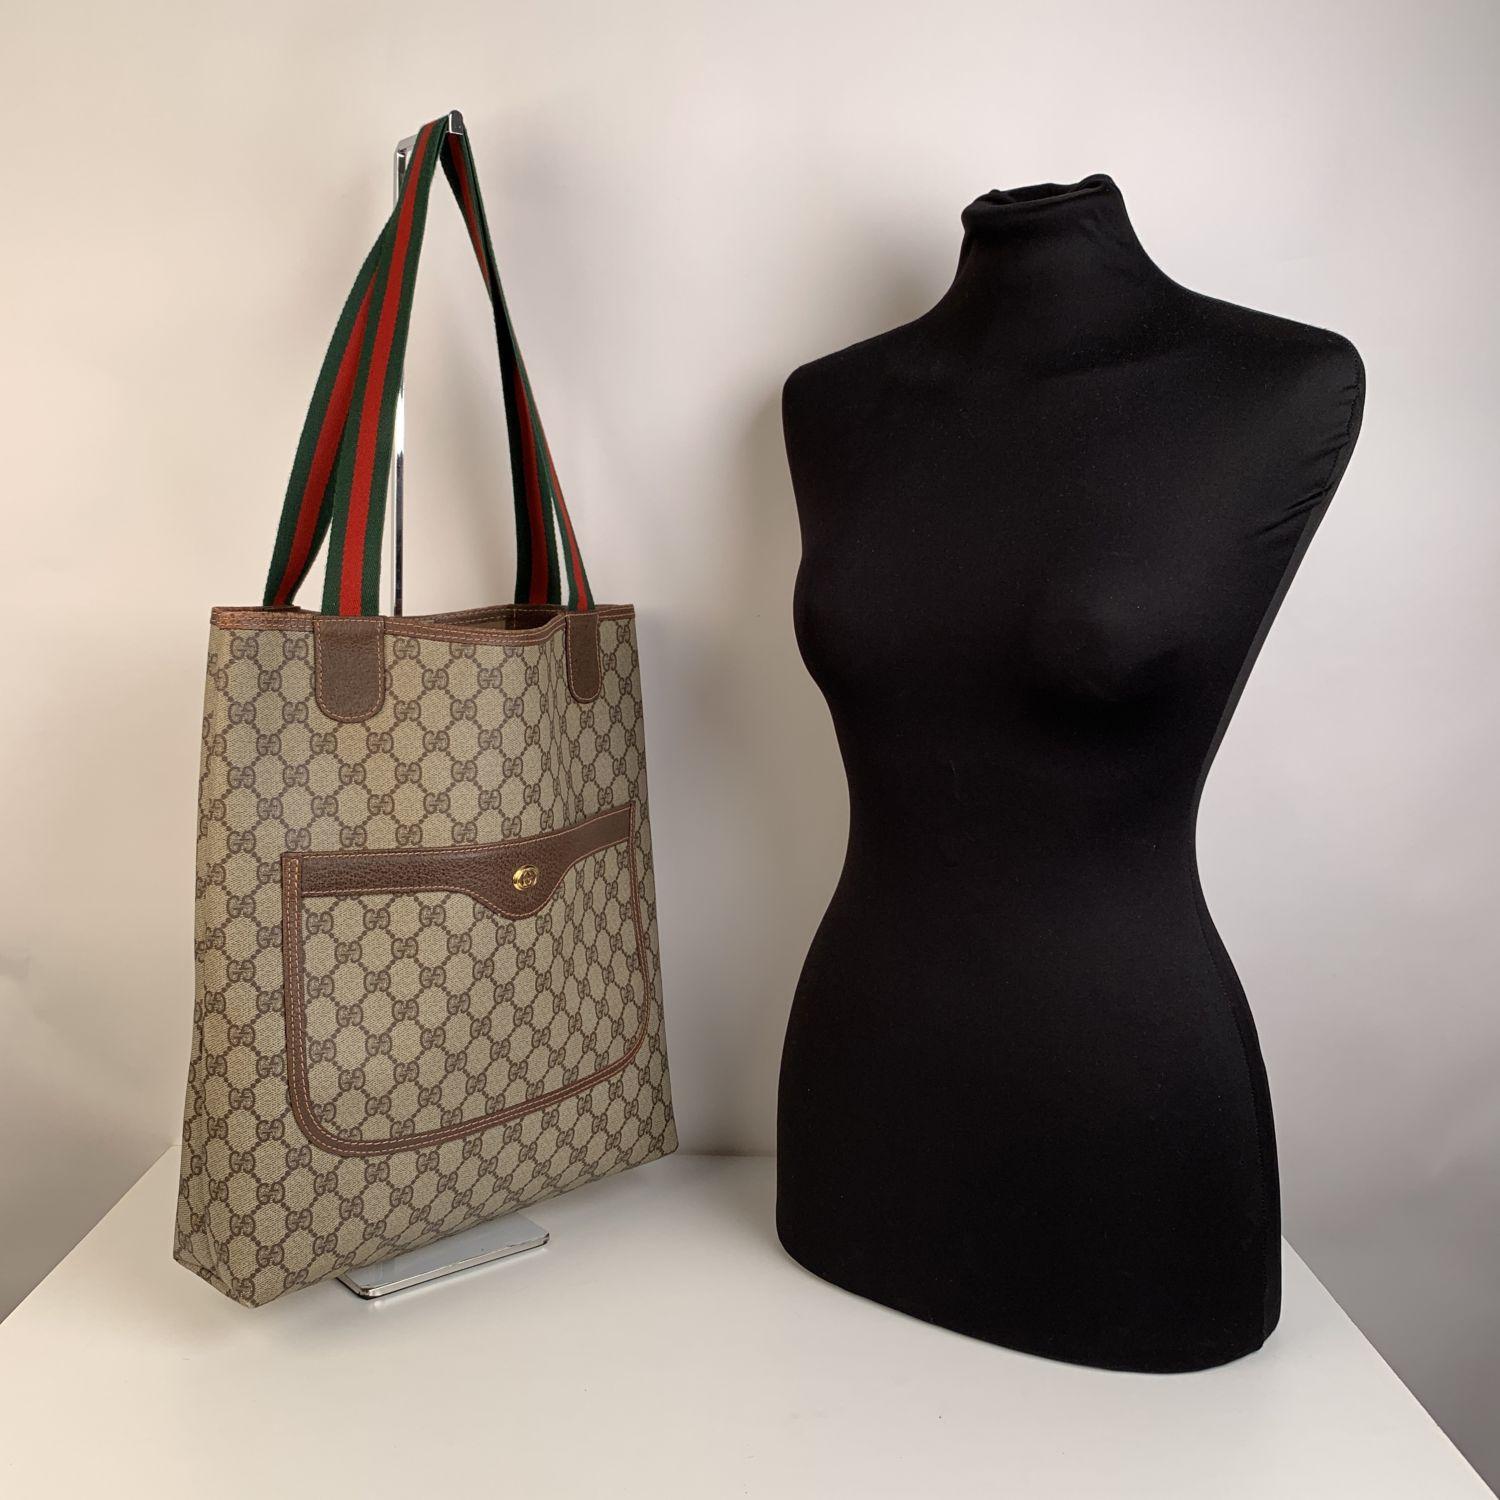 Beautiful Gucci tote made in monogram canvas with brown leather trim. Green/Red/Green striped canvas shoulder straps. 1 front patch pocket. Enameled GG- GUCCI logo tab on the front. Tan canvas lining. 'GUCCI Accessory collection - Made in Italy' tag